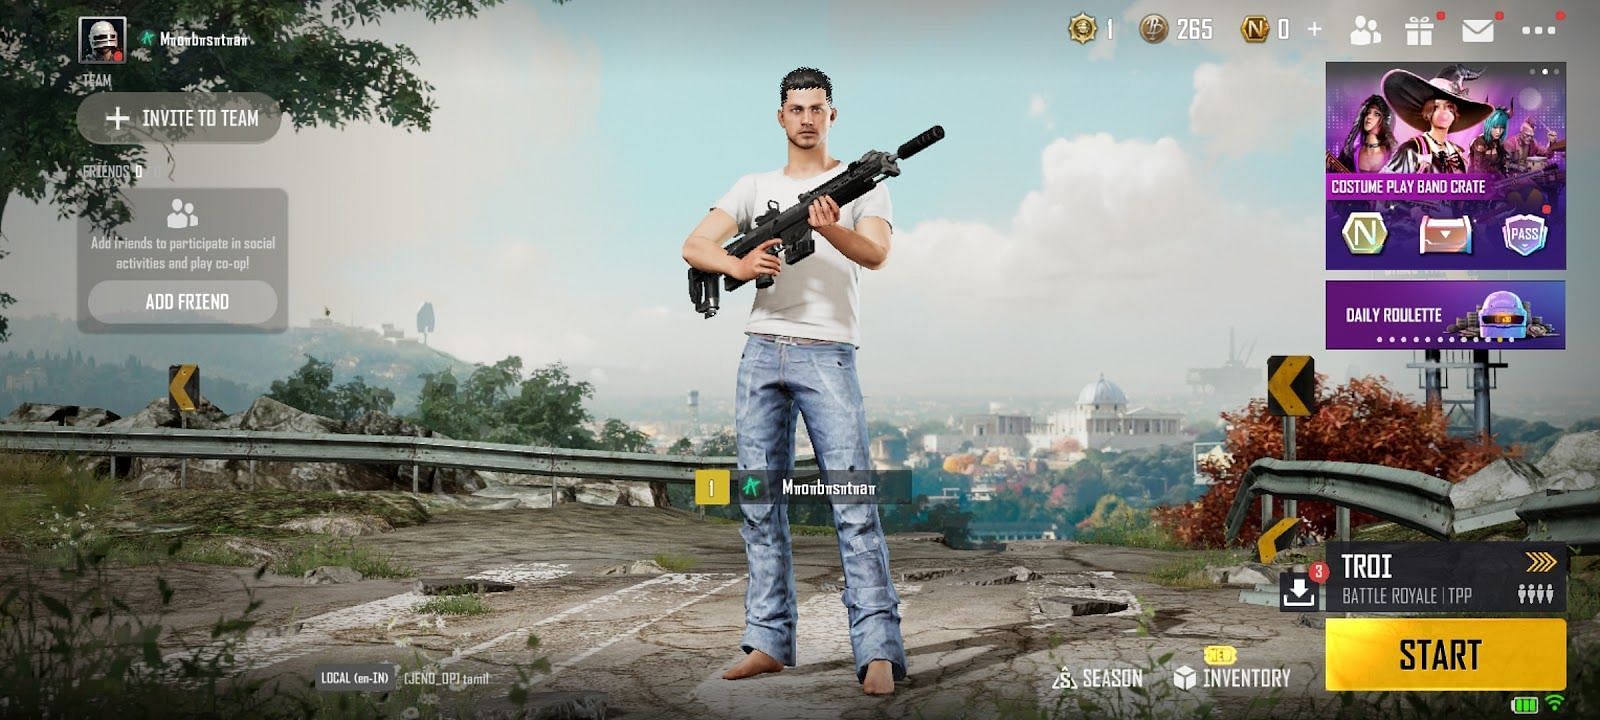 PUBG New State provides the best gaming experience on higher-end smartphones (Image via PUBG New State)